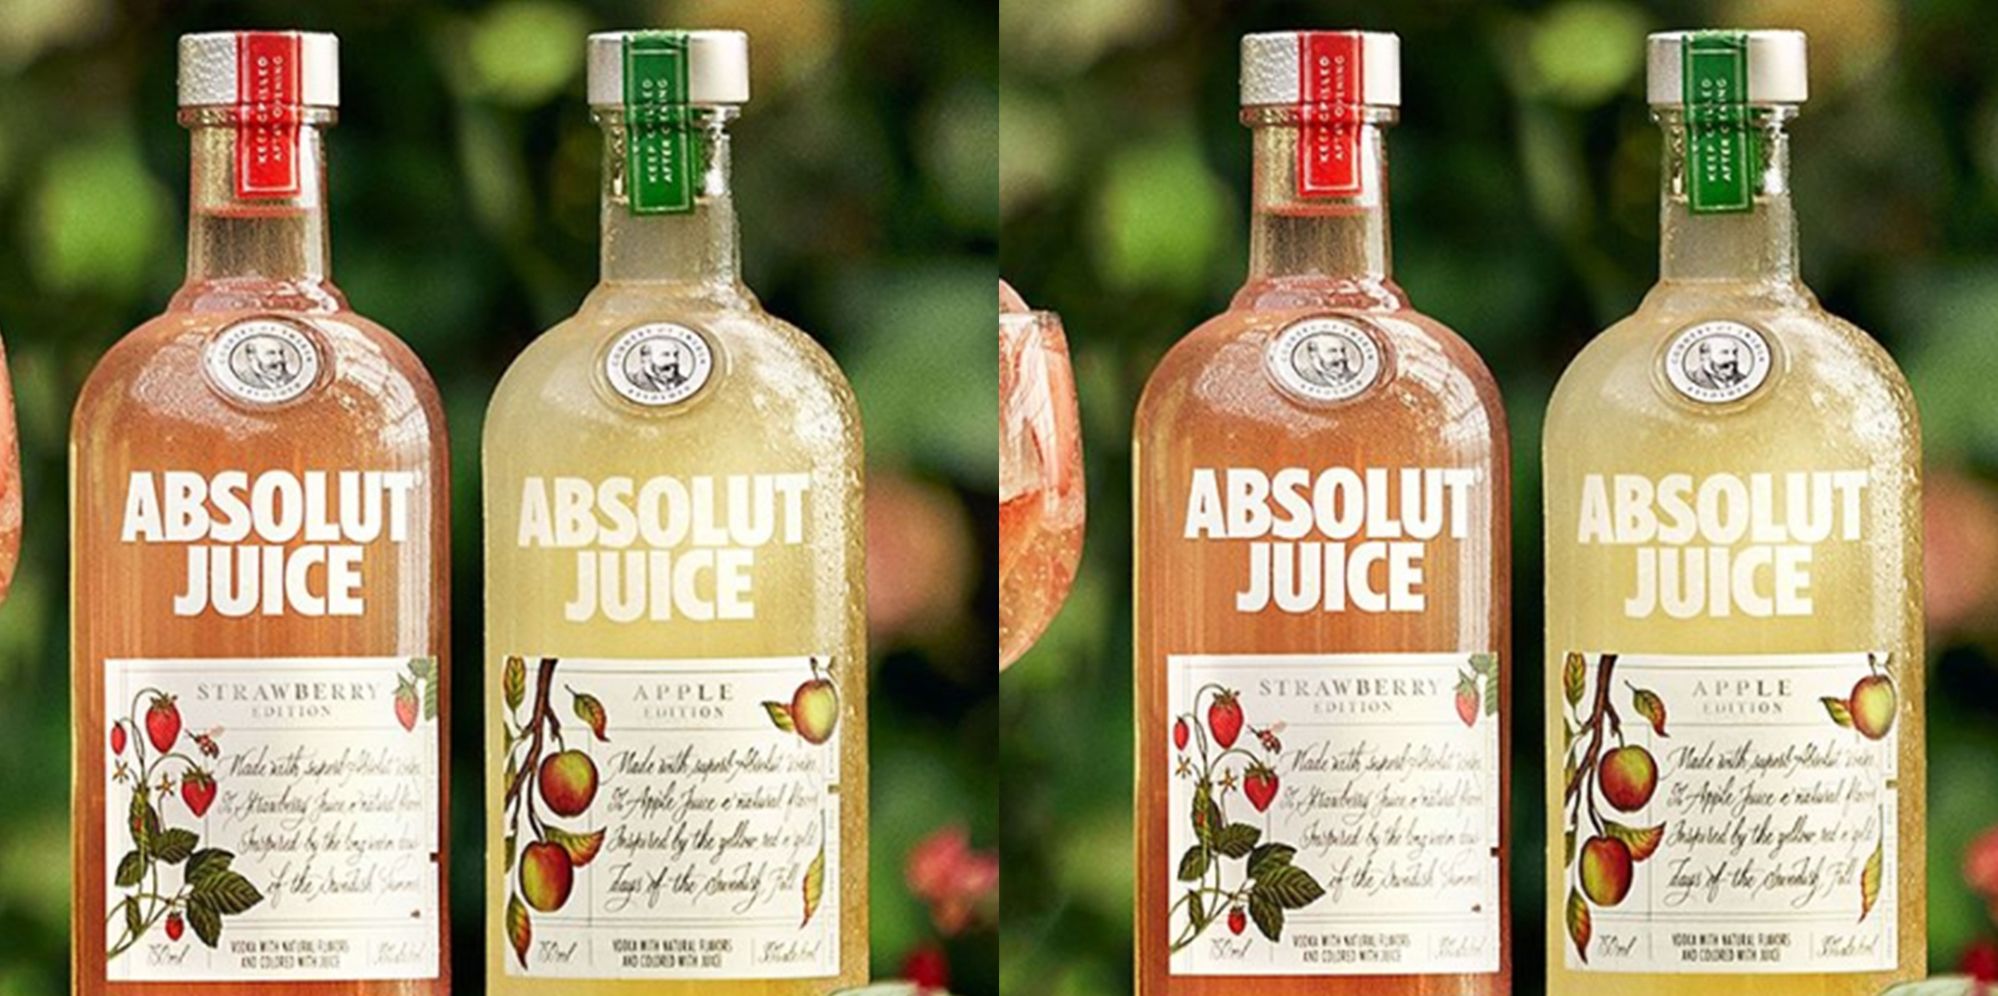 Absolut Vodka Introduces Absolut Juice With Real Fruit